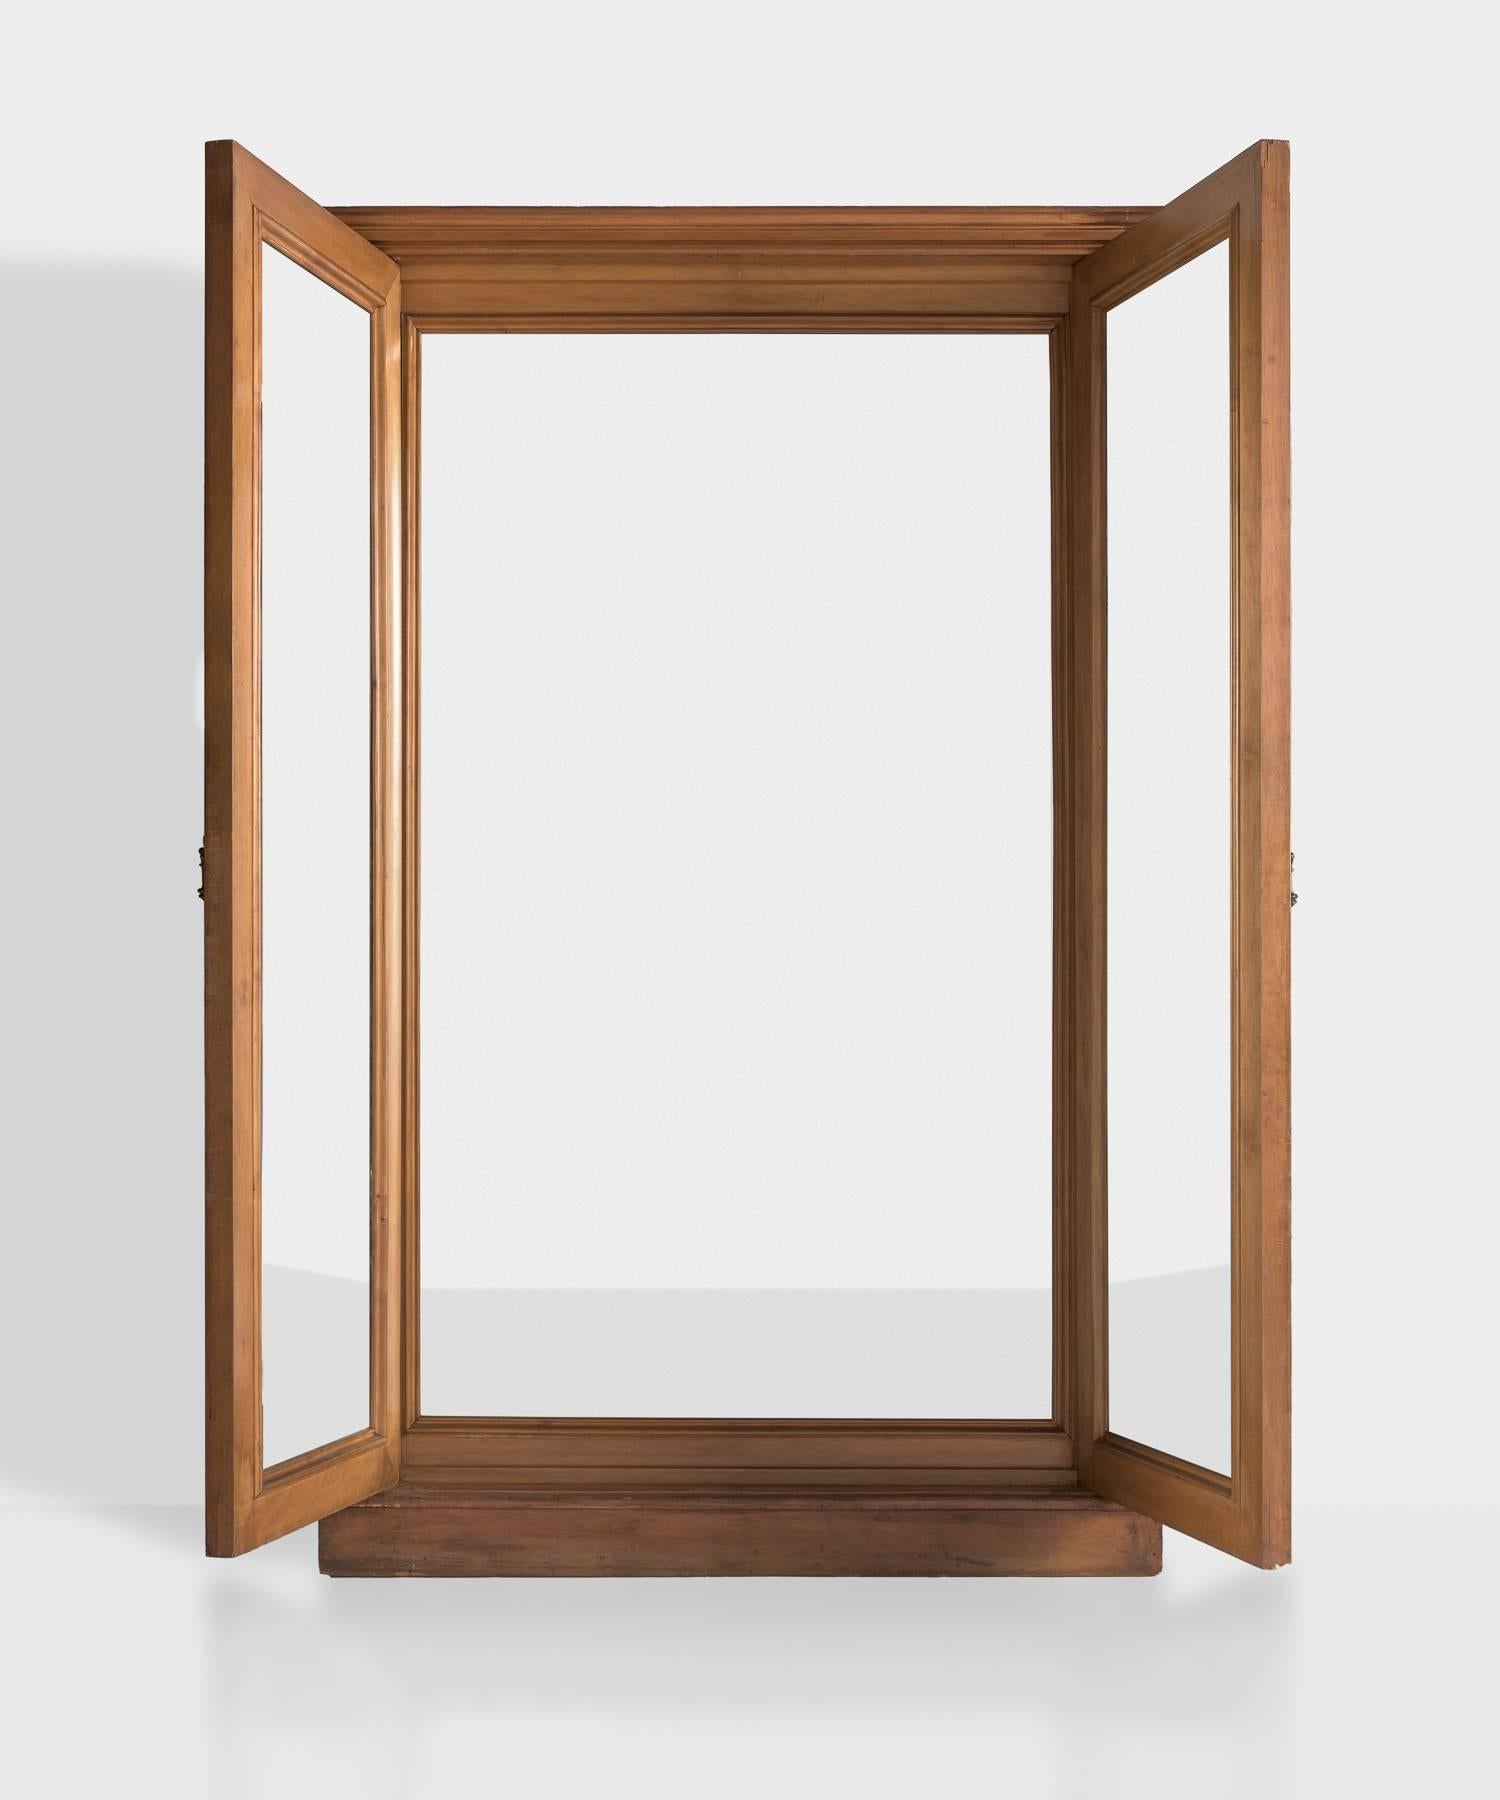 Architectural triptych mirror, circa 1870.

Full length dressing mirror with architectural design and bevelled glass interior.